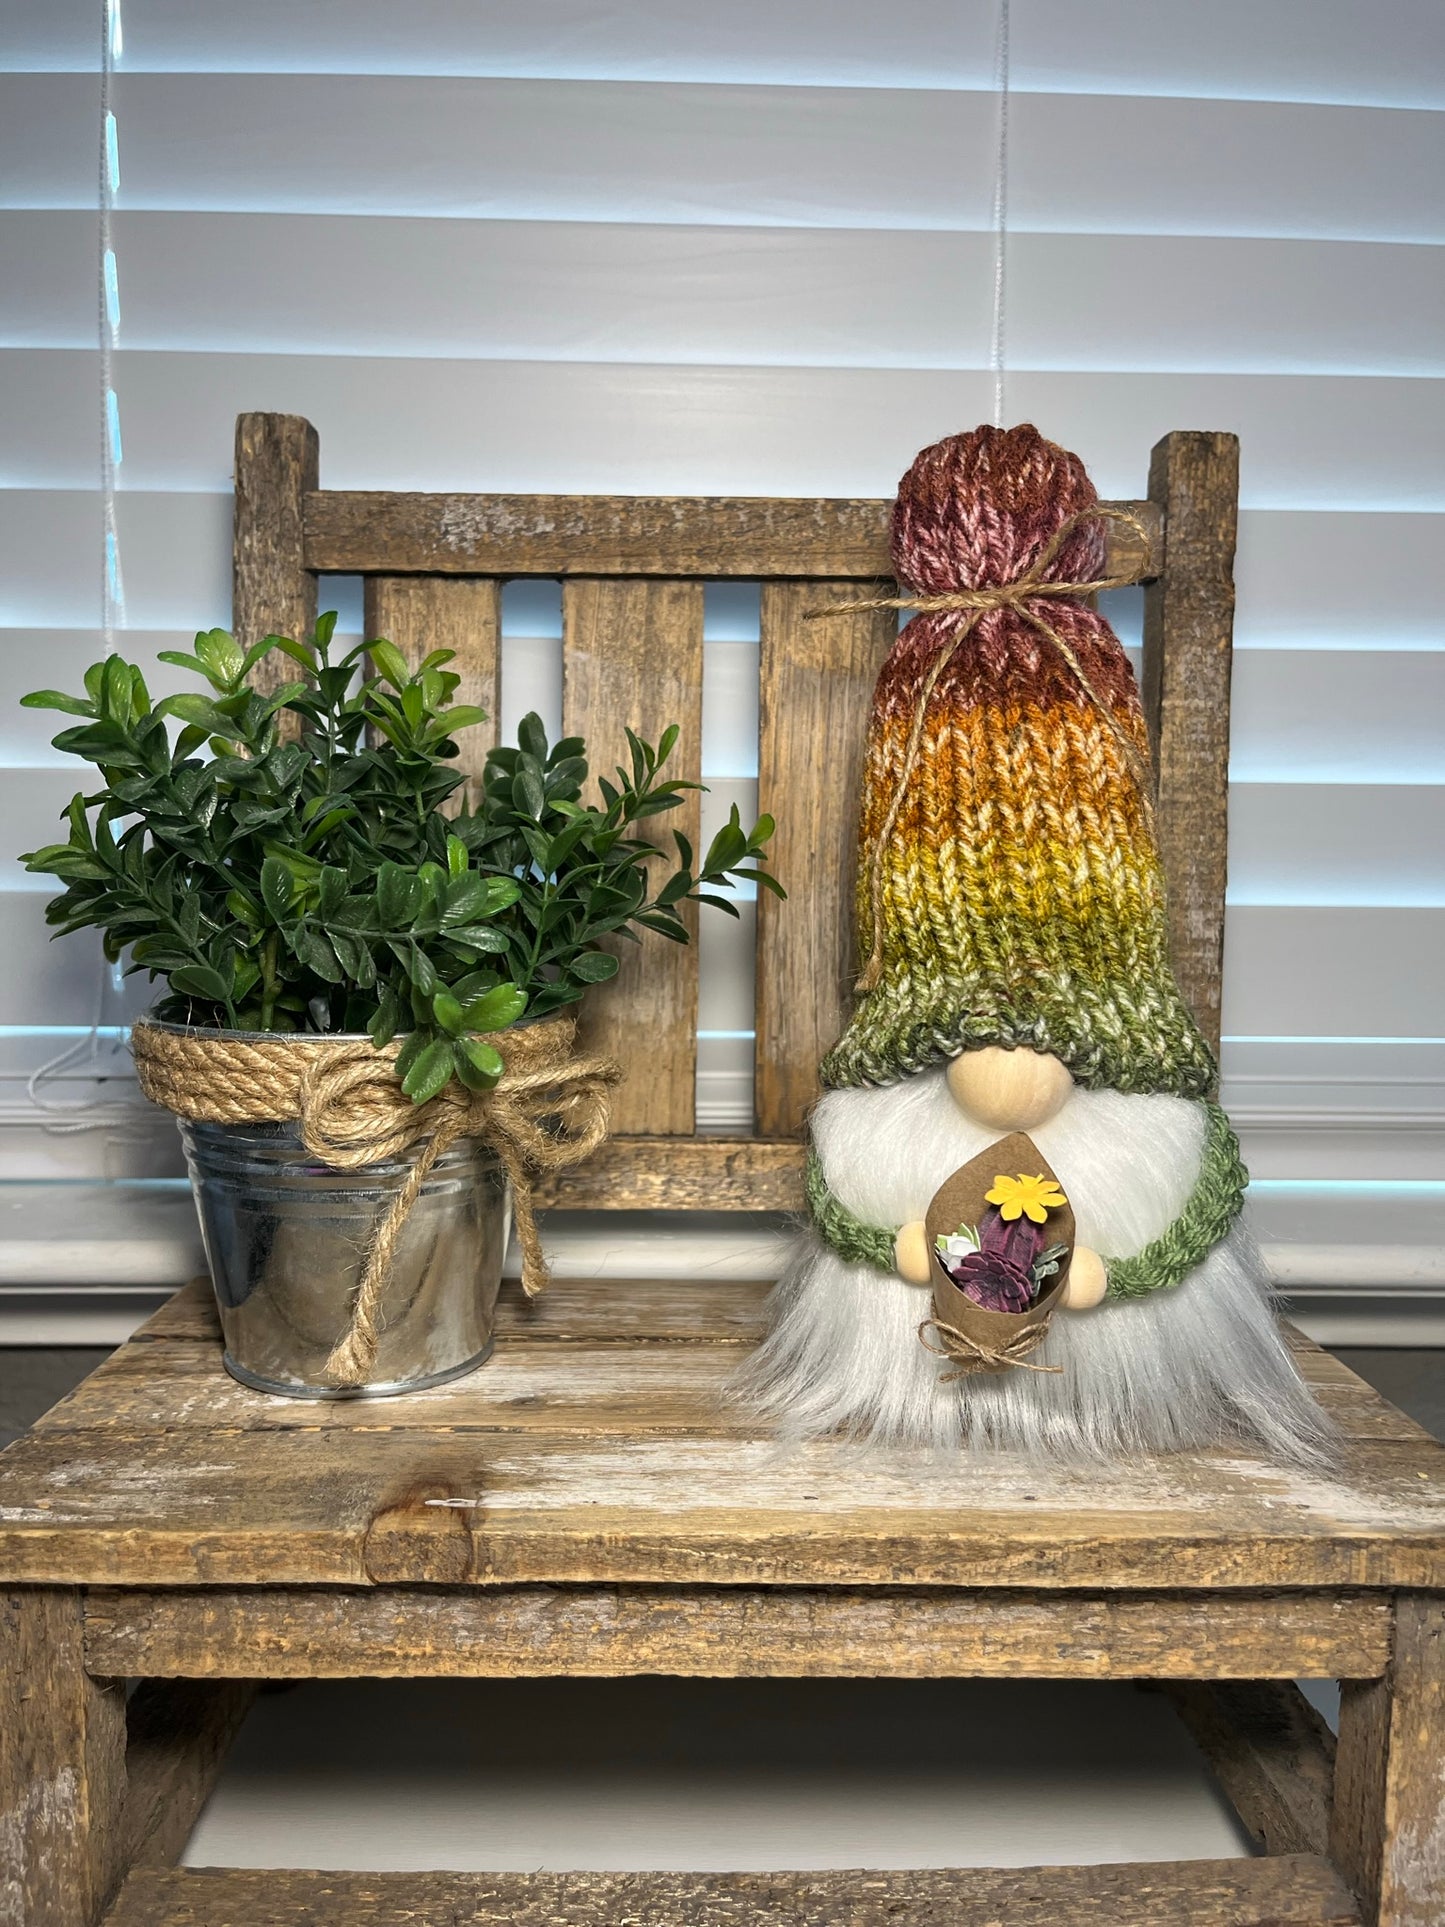 Cactus Gnome / Succulent Home Decor / Tiered Tray Display Accessories